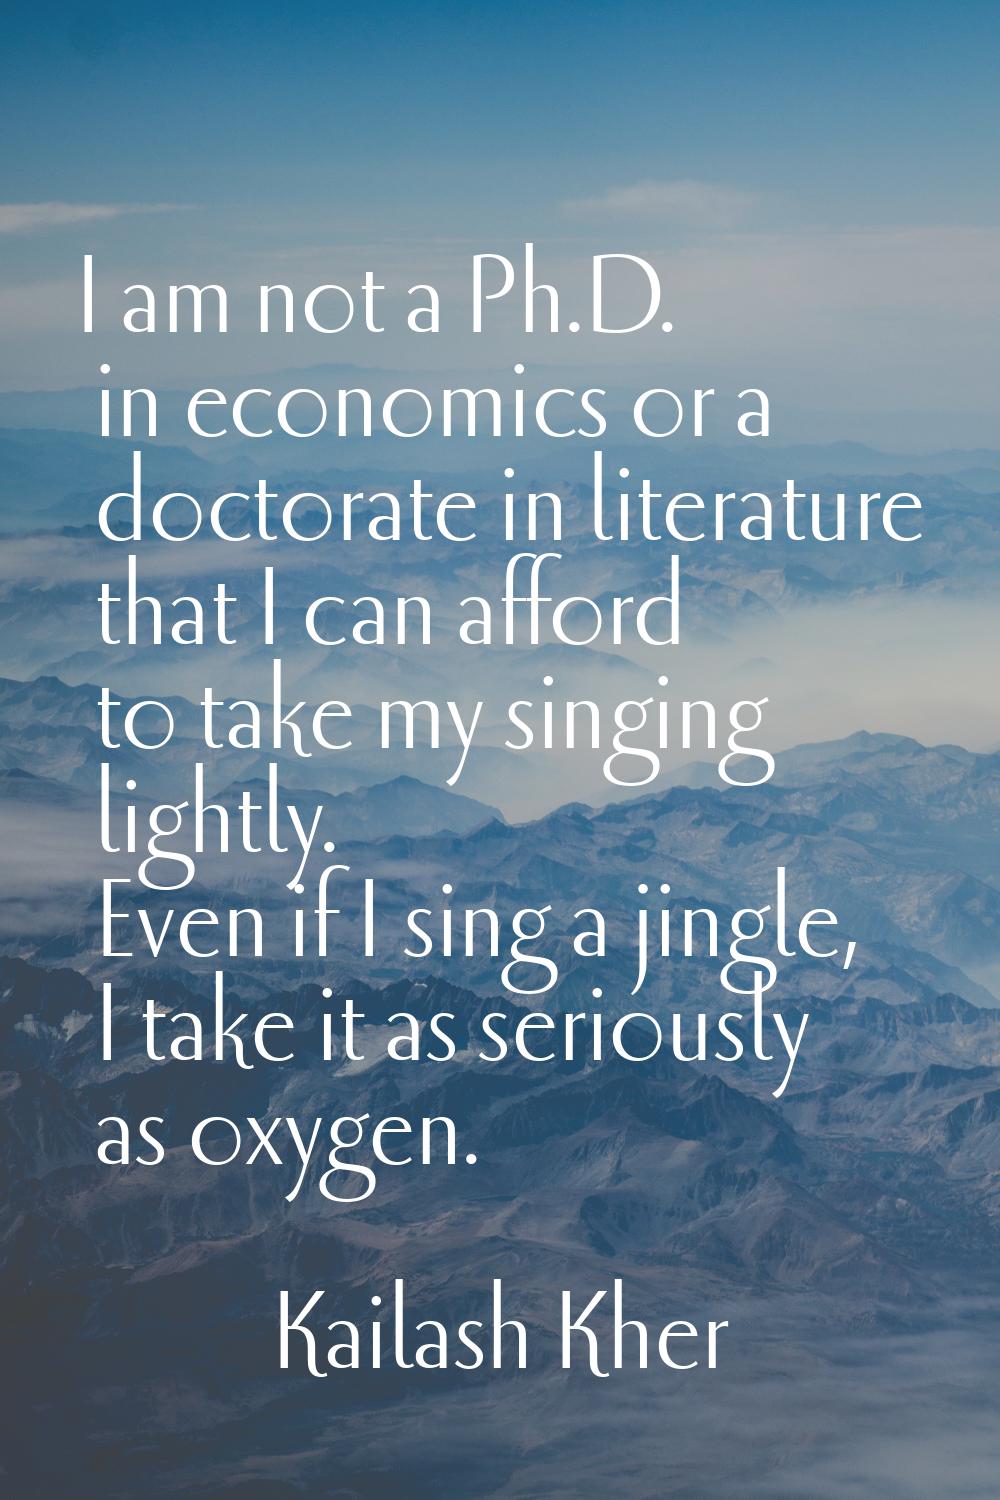 I am not a Ph.D. in economics or a doctorate in literature that I can afford to take my singing lig